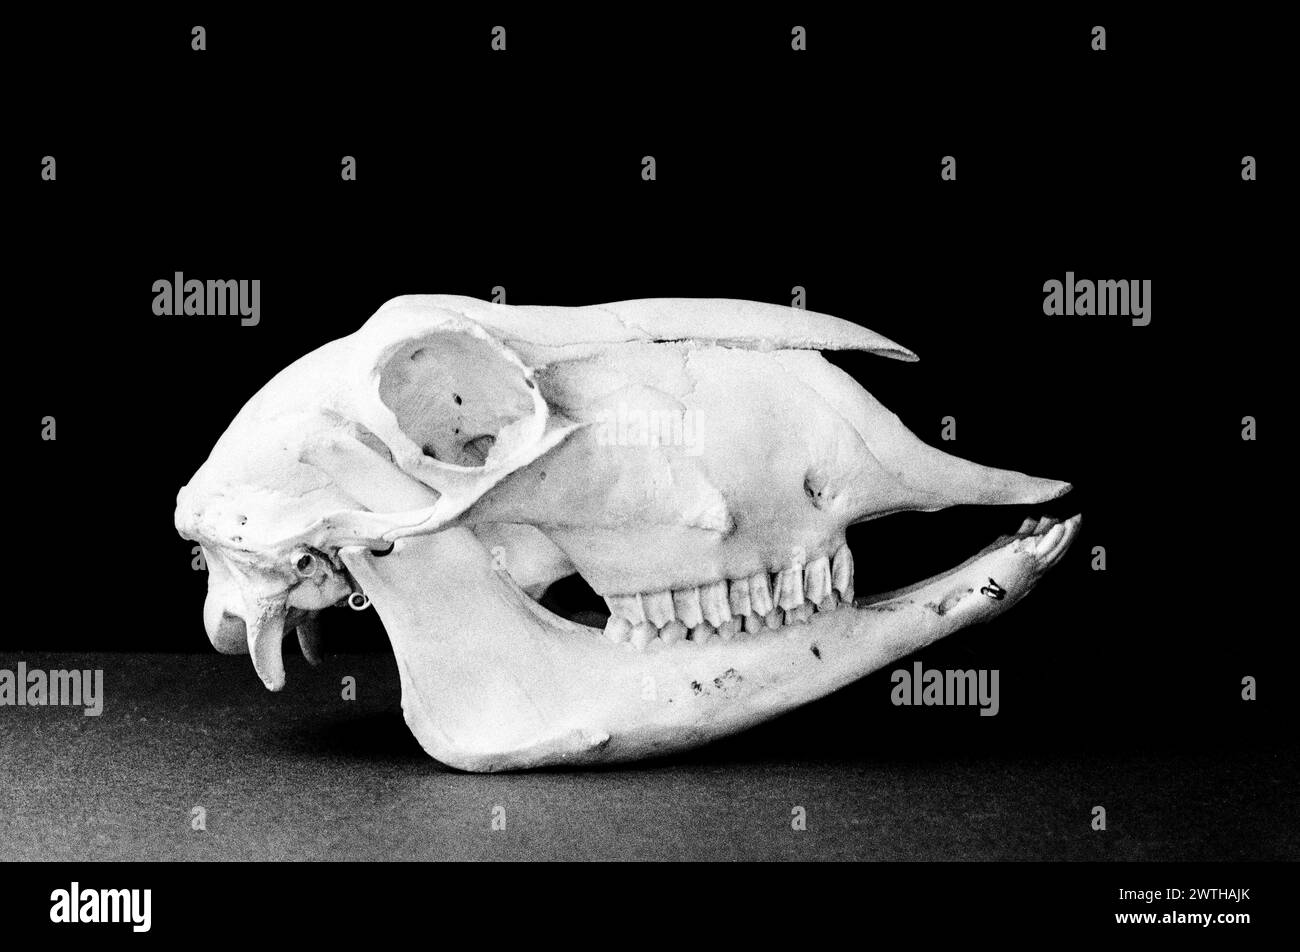 Sheep skull, photographed with a black studio background. Stock Photo